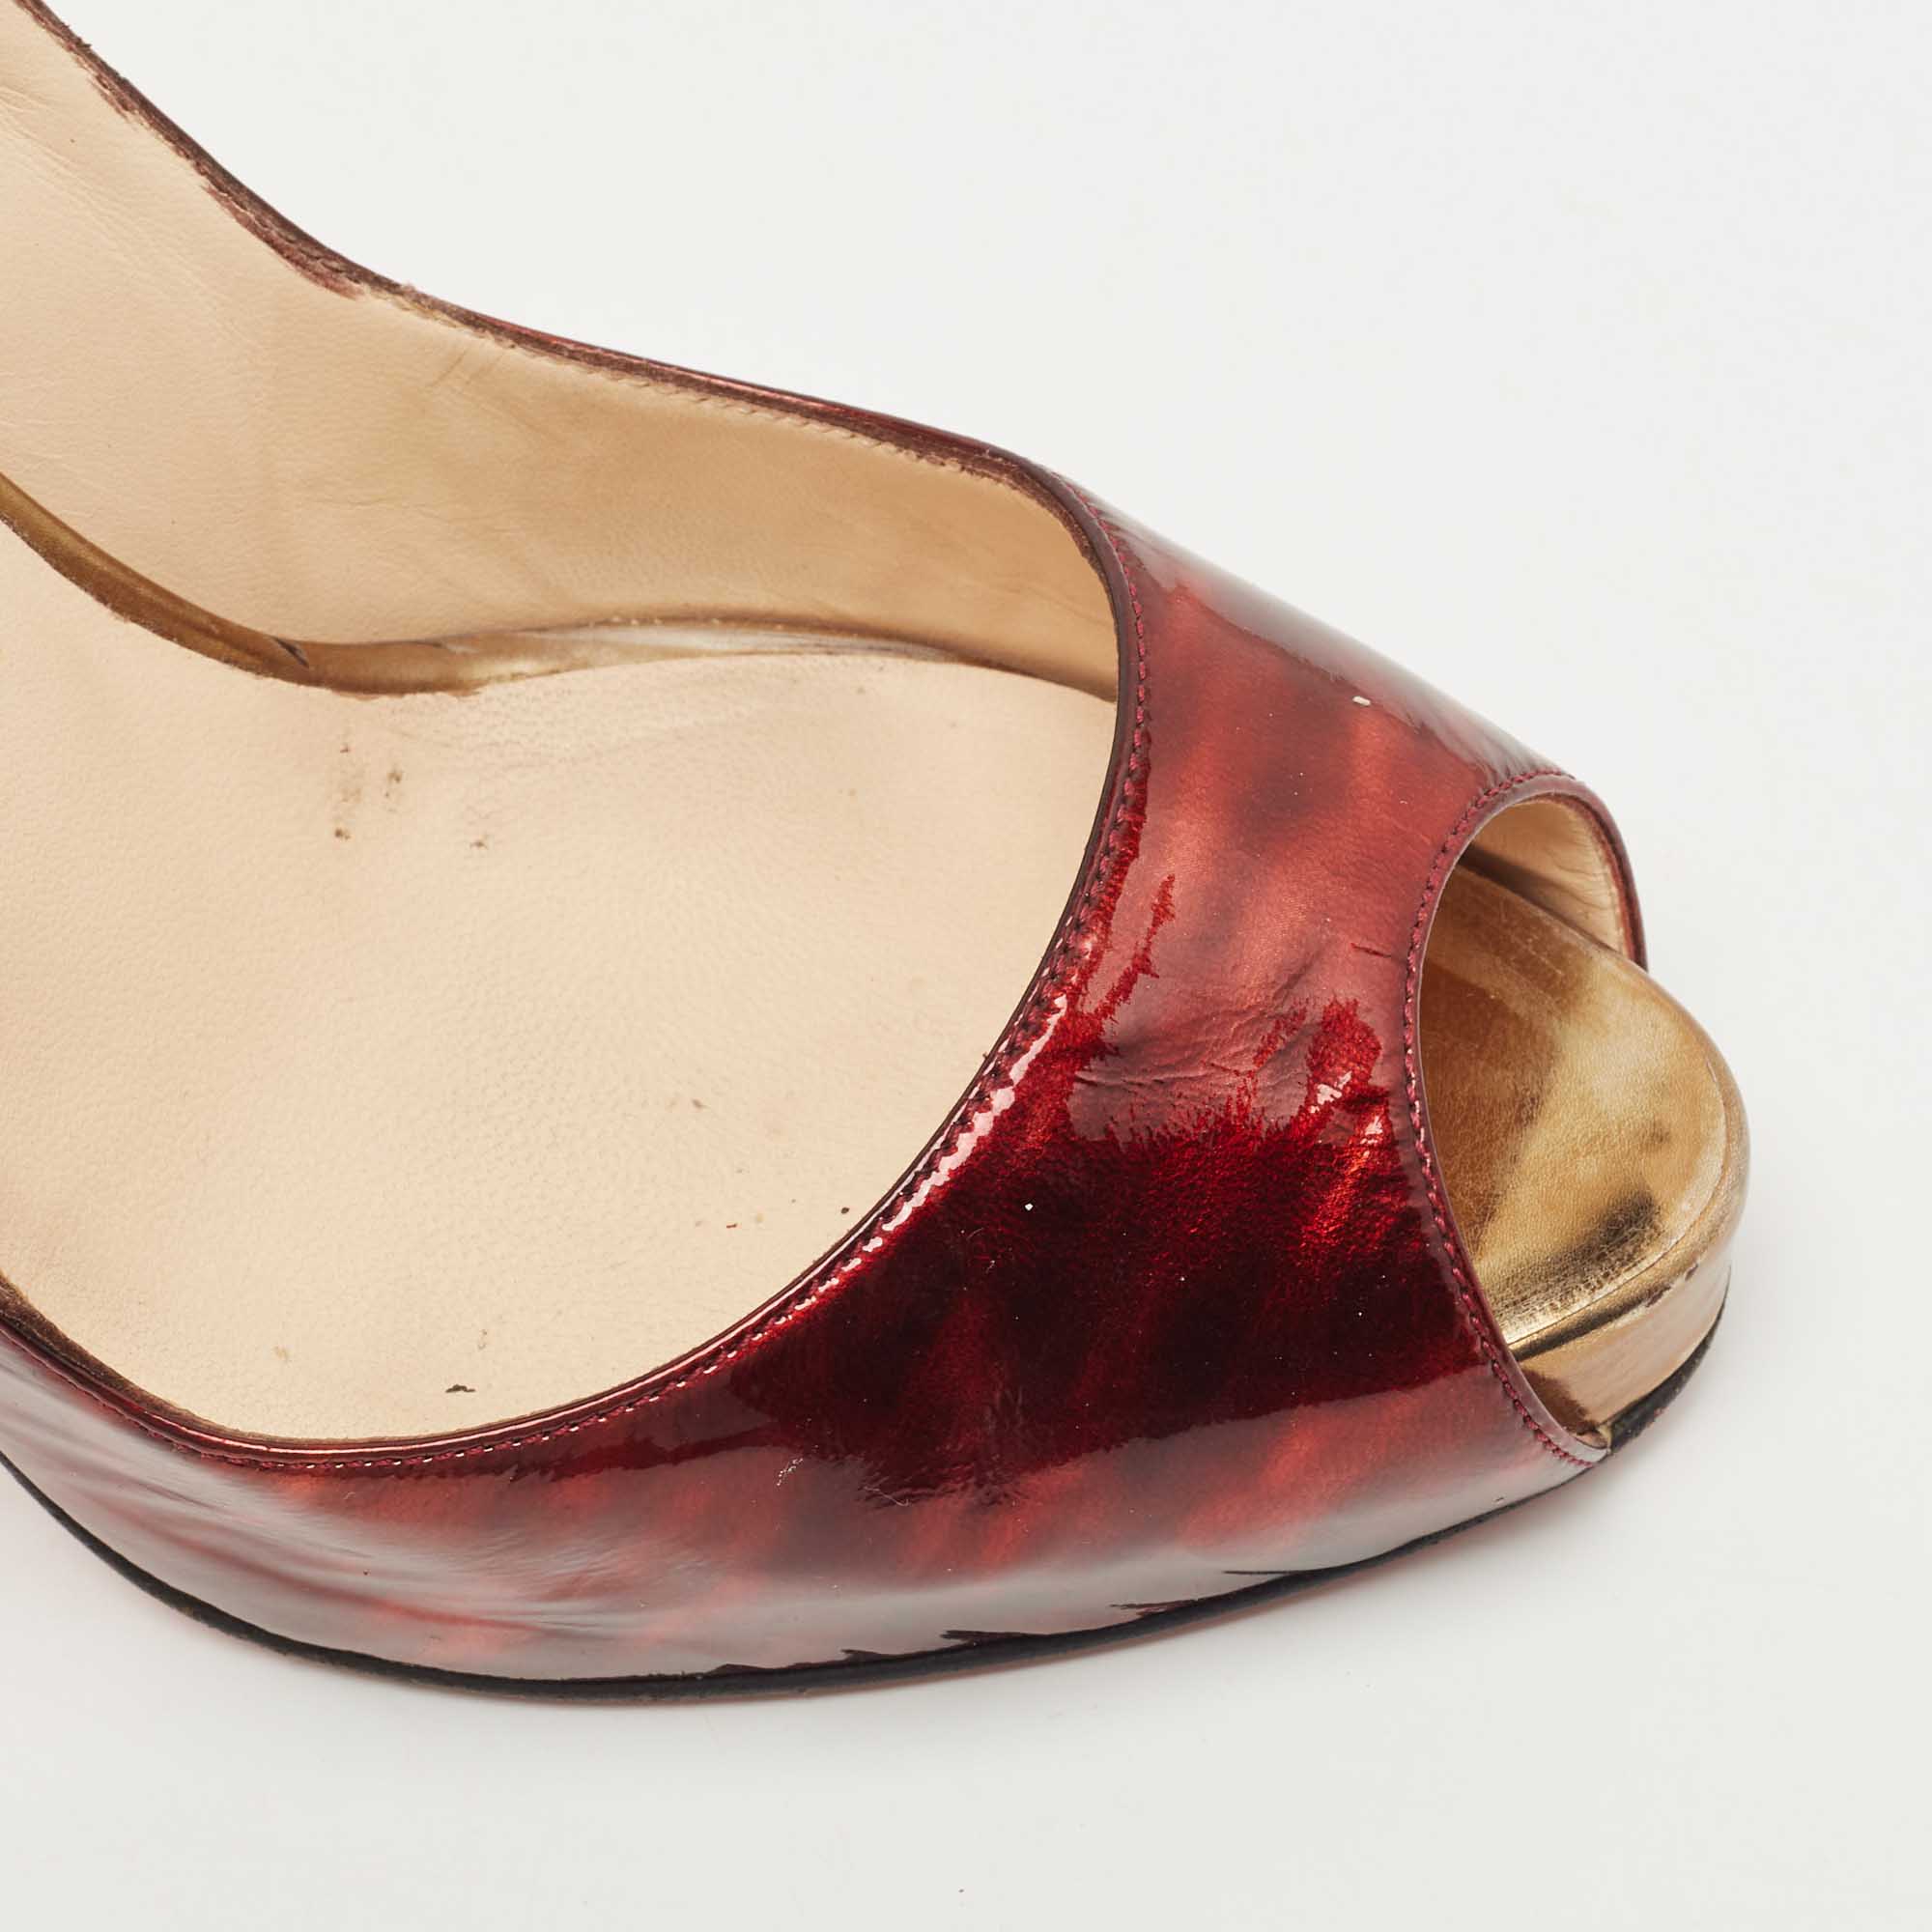 Christian Louboutin Two Tone Patent Leather No Prive Slingback Pumps Size 38